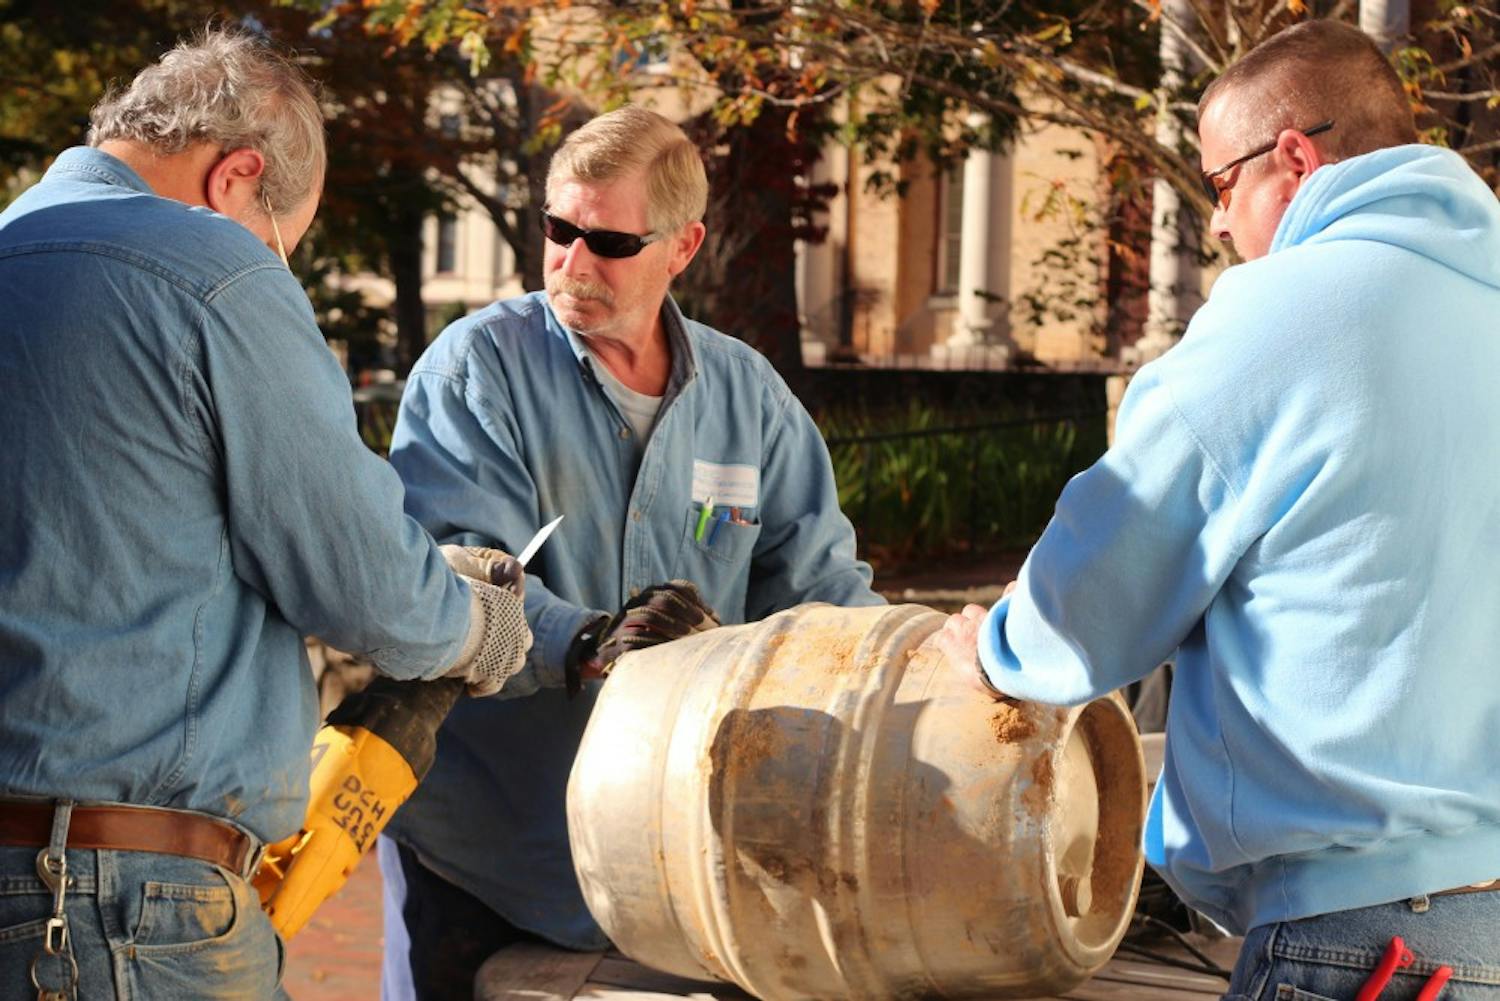 The graduating class of 1988 returned to campus to recover the time capsule they buried a quarter of a century earlier. The time capsule, a stainless steel keg donated by a then local bar, proved to be a challenge for the grounds workers that had to both dig it up and cut through it on Friday at 1 p.m. The keg was buried under a plaque on Polk Place between the flagpole and  South Building. The alumnae will be celebrating their 25th reunion during Homecoming weekend and look forward to exploring the capsule's artifacts in Wilson Library this week.